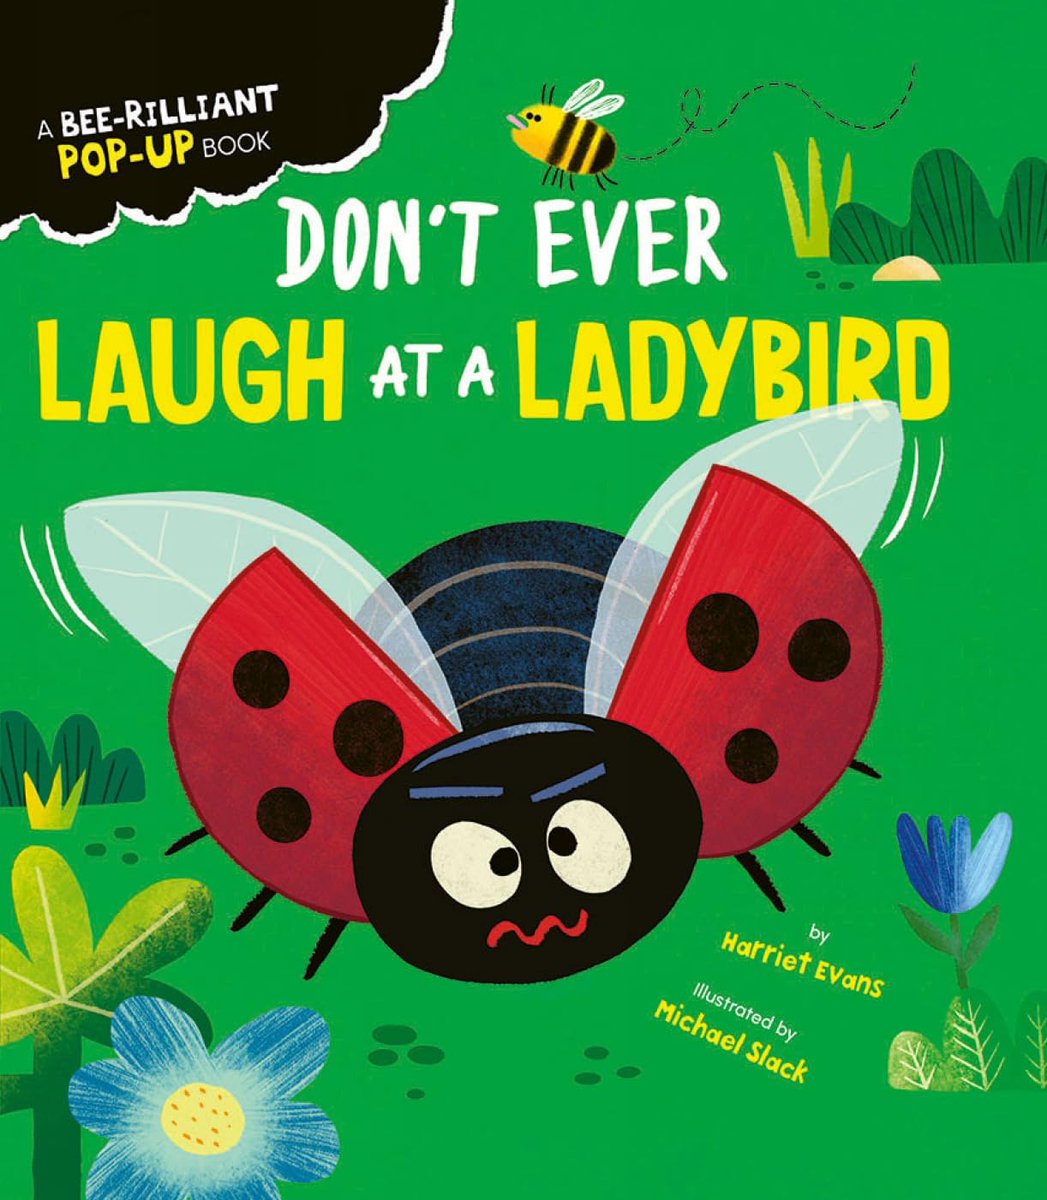 Meet a whole host of favourite insects & creatures in #HarrietEvans & #MichaelSlack’s brilliantly engineered pop-up board book Don't Ever Laugh at a Ladybird @books4mine @LittleTigerUK pamnorfolkblog.blogspot.com Review also @leponline later this week!